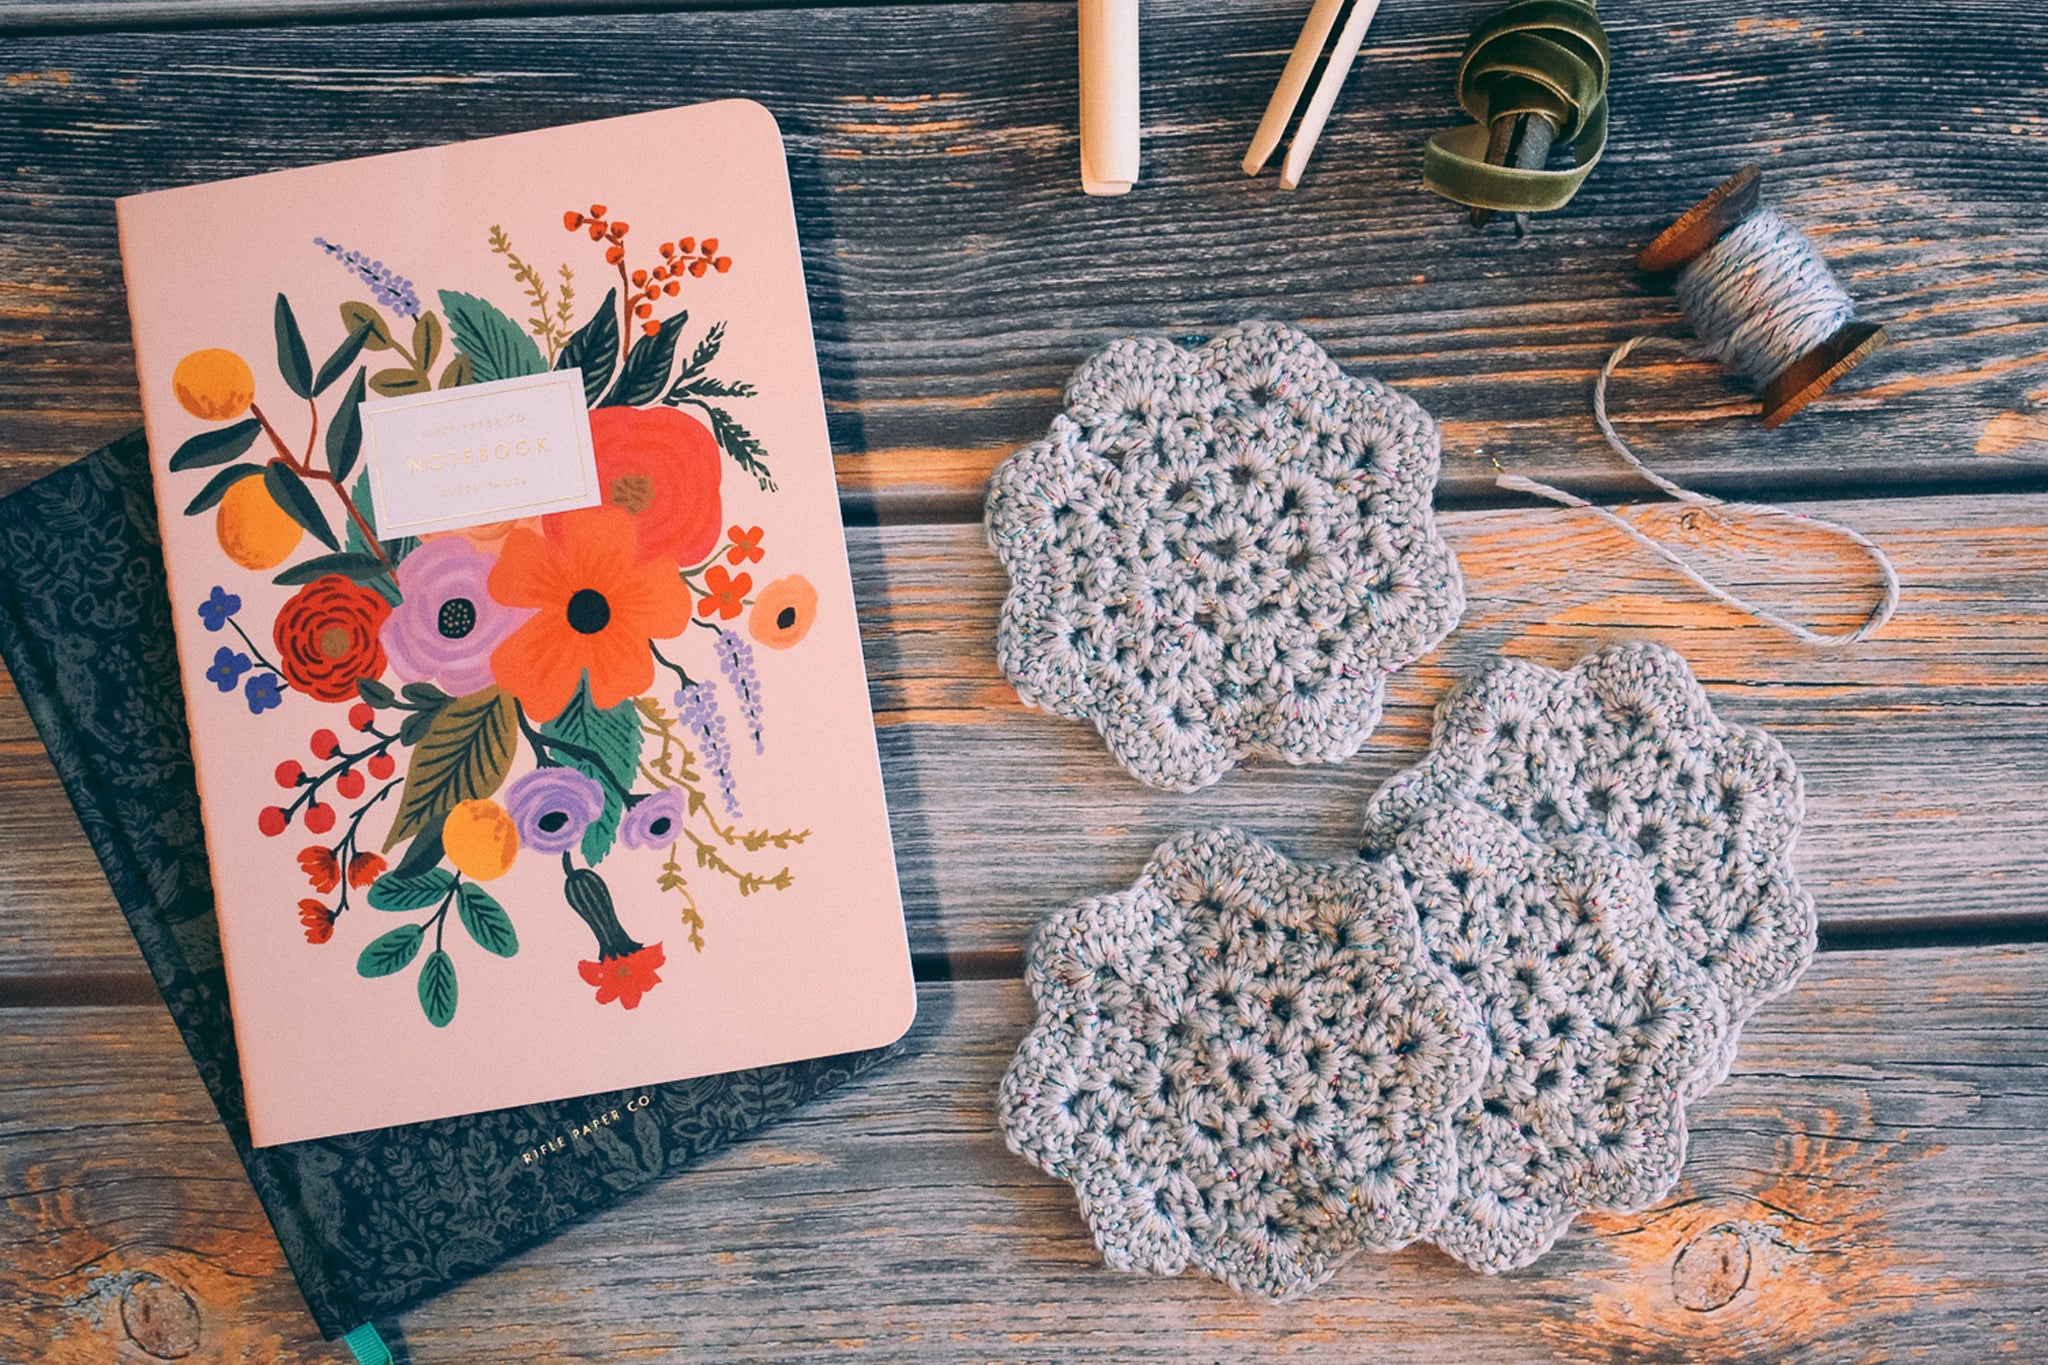 Critter Crafting - Silver Crochet Coasters & Cottagecore Home Accents - Rifle Paper Co. Notebooks and Ribbon